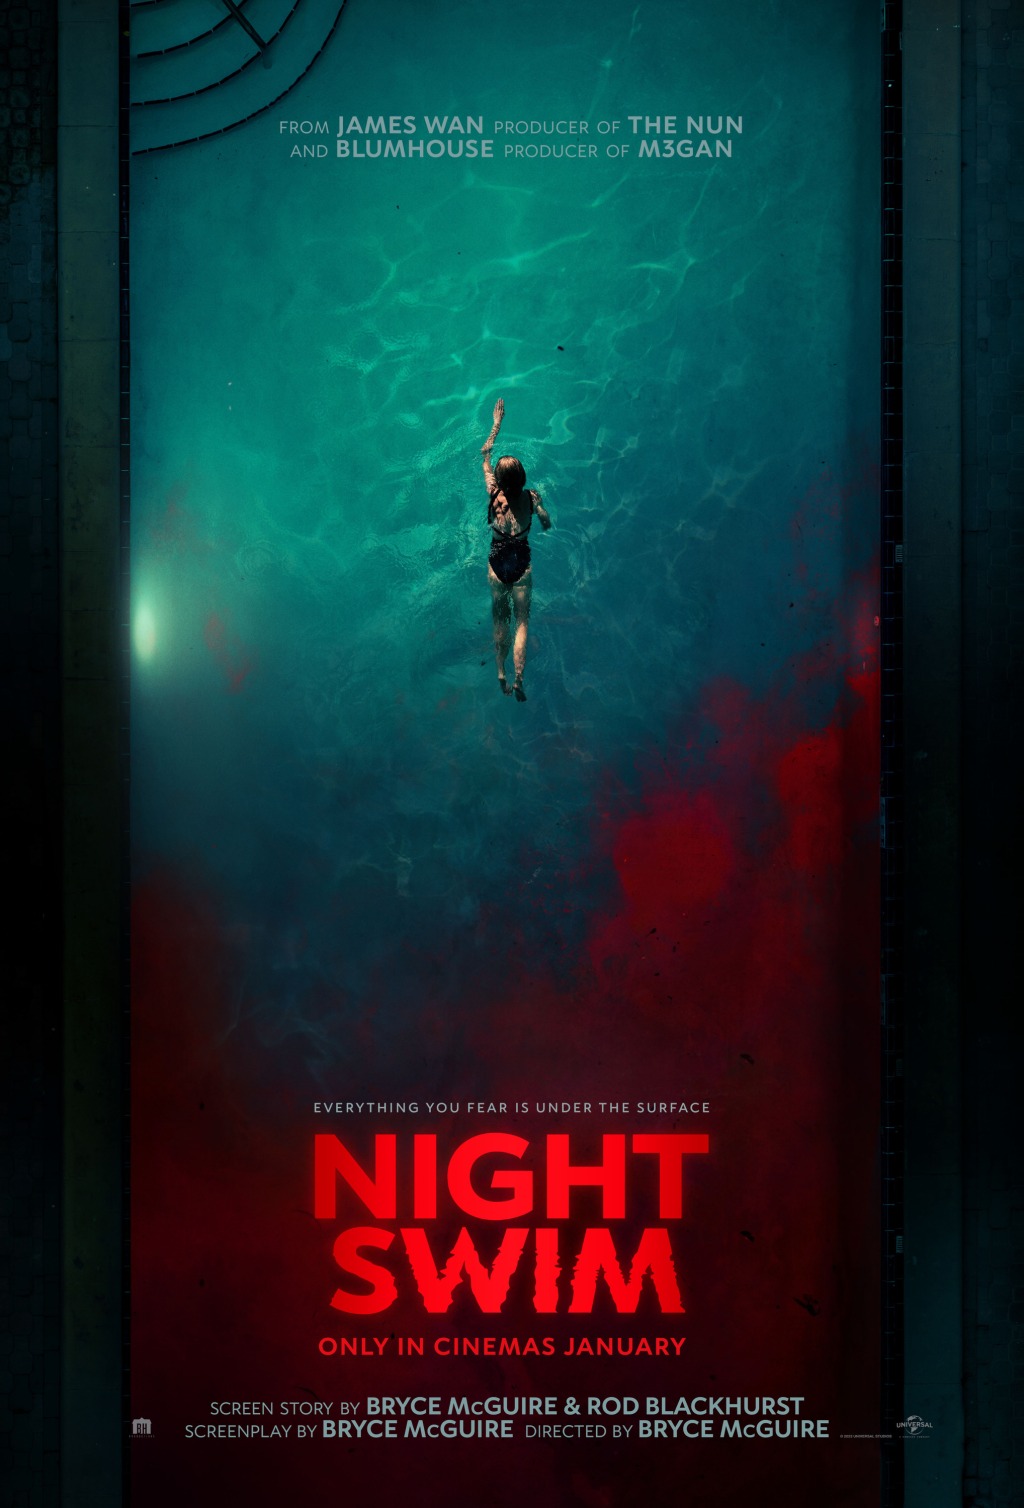 Night Swim Review — New horror film drowns in its unexplored ideas